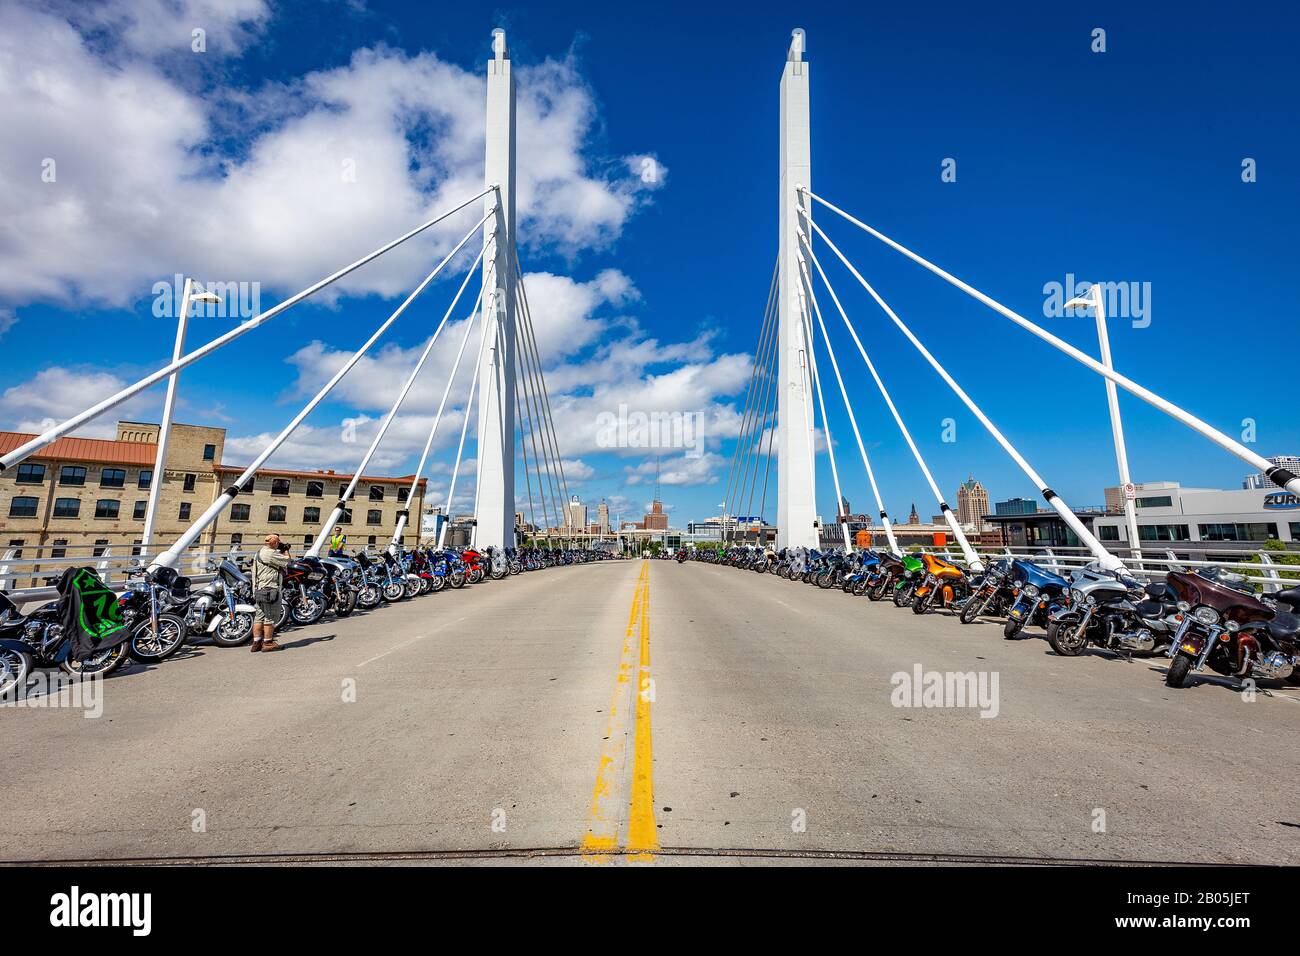 MILWAUKEE, WISCONSIN /UNITED STATES OF AMERICA - AUGUST 30, 2018: Outside Harley-Davidson Museum during the 115th anniversary celebration. Stock Photo